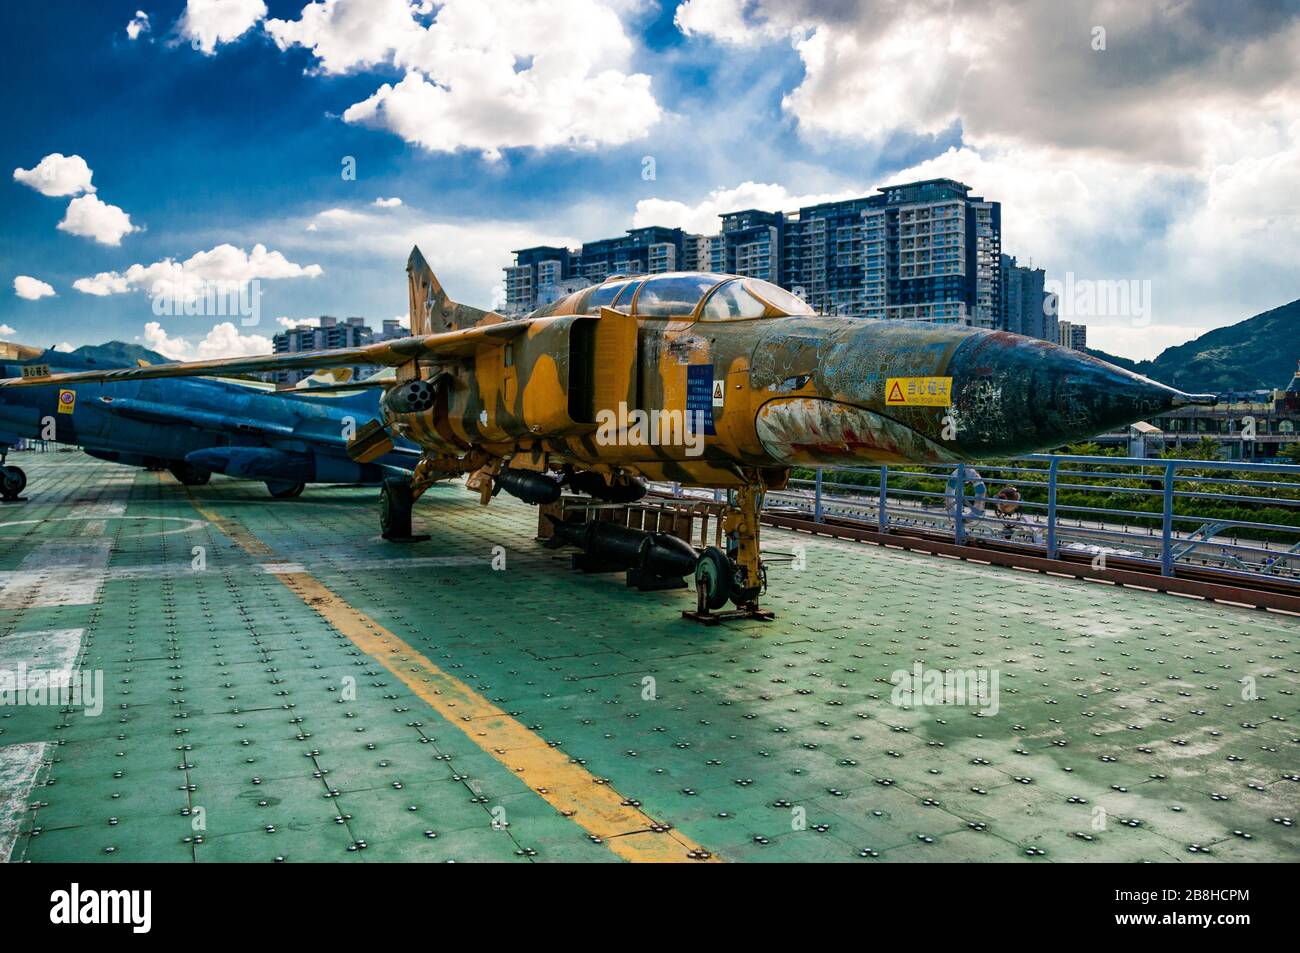 Minsk is an old Soviet aircraft carrier in use as a military theme park in Yantian, Shenzhen, China with a former Egyptian MiG-23U trainer on the deck Stock Photo